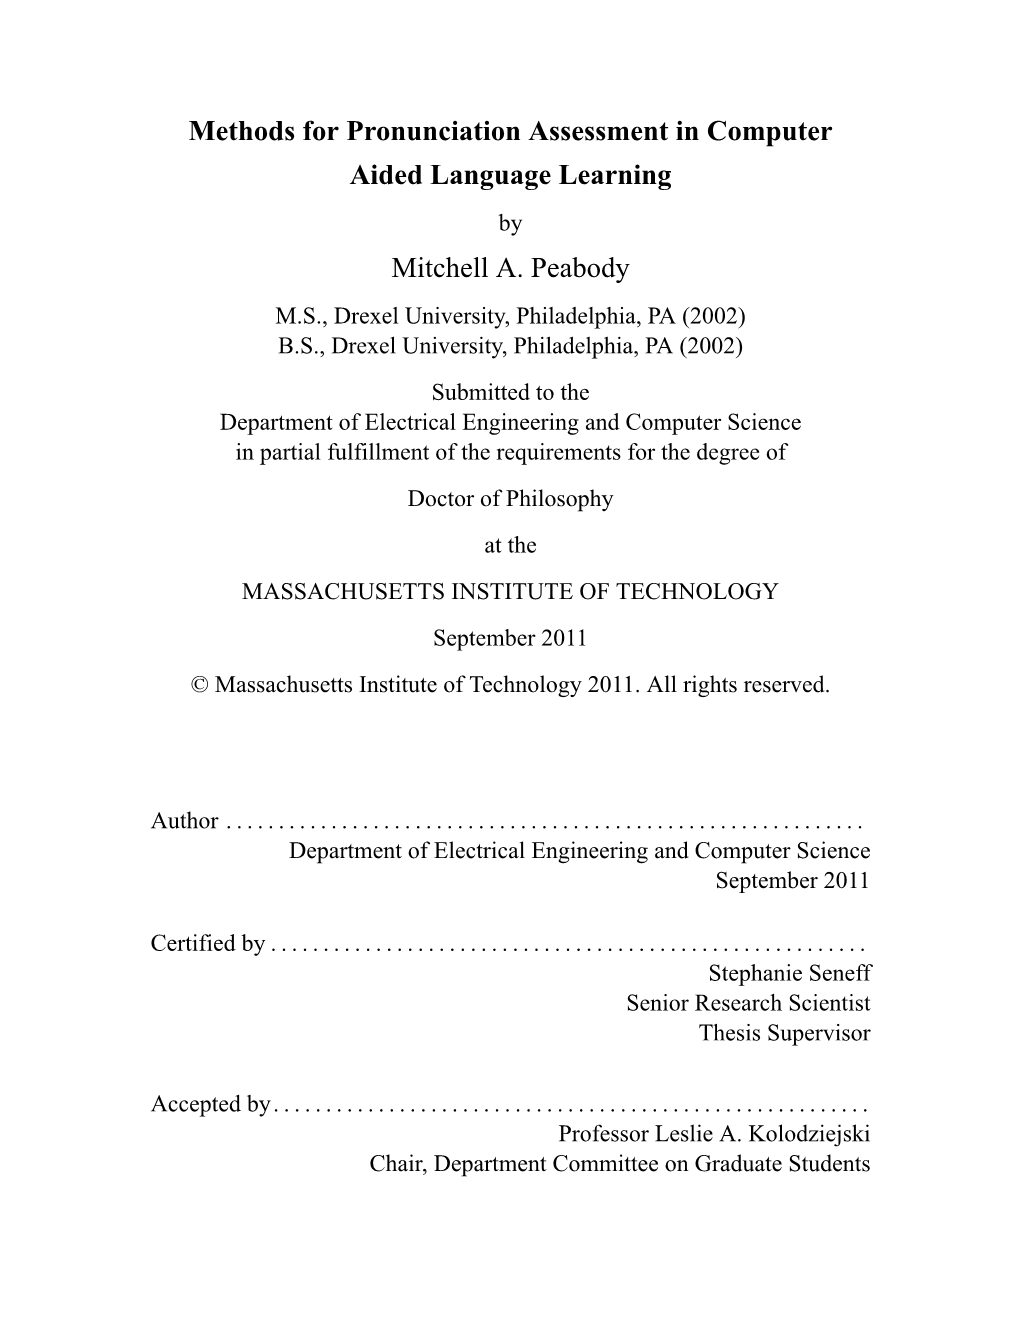 Methods for Pronunciation Assessment in Computer Aided Language Learning by Mitchell A